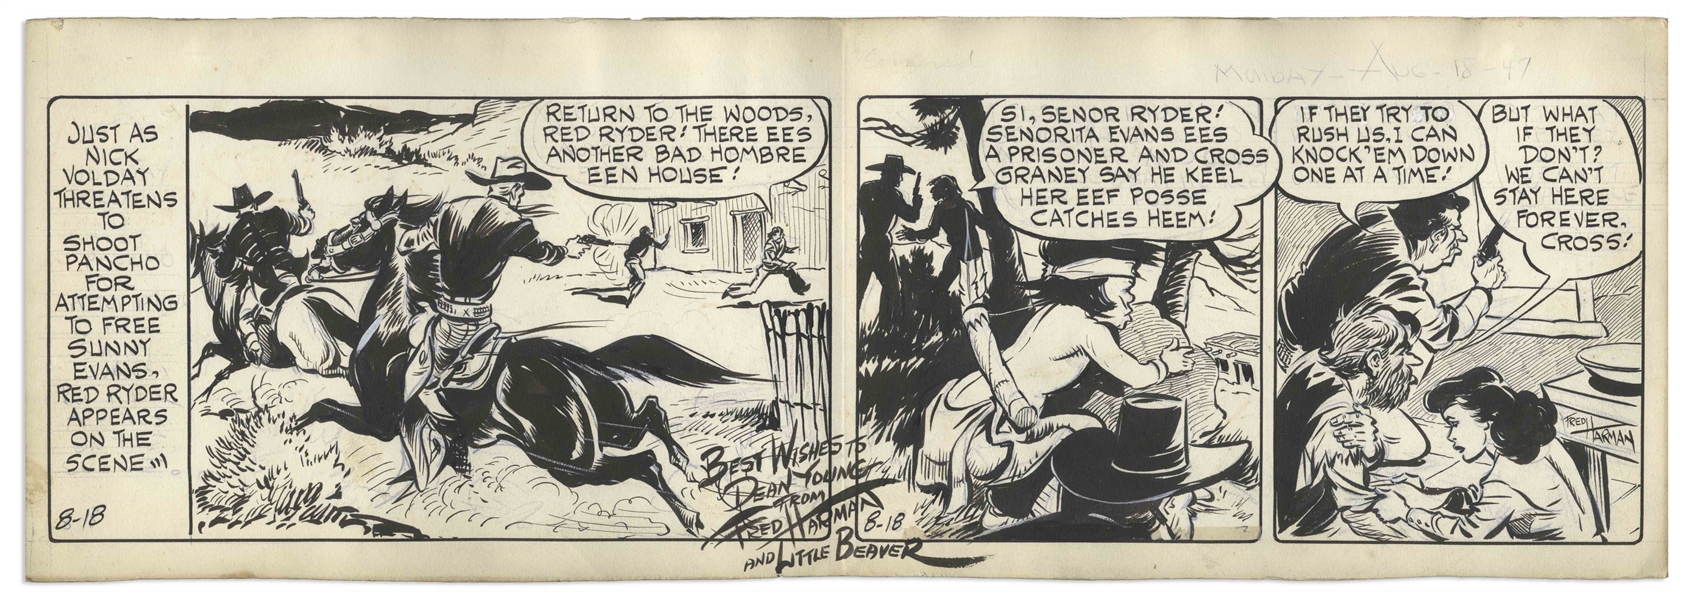 ''Red Ryder'' Comic Strip Hand-Drawn by Fred Harman From 1947